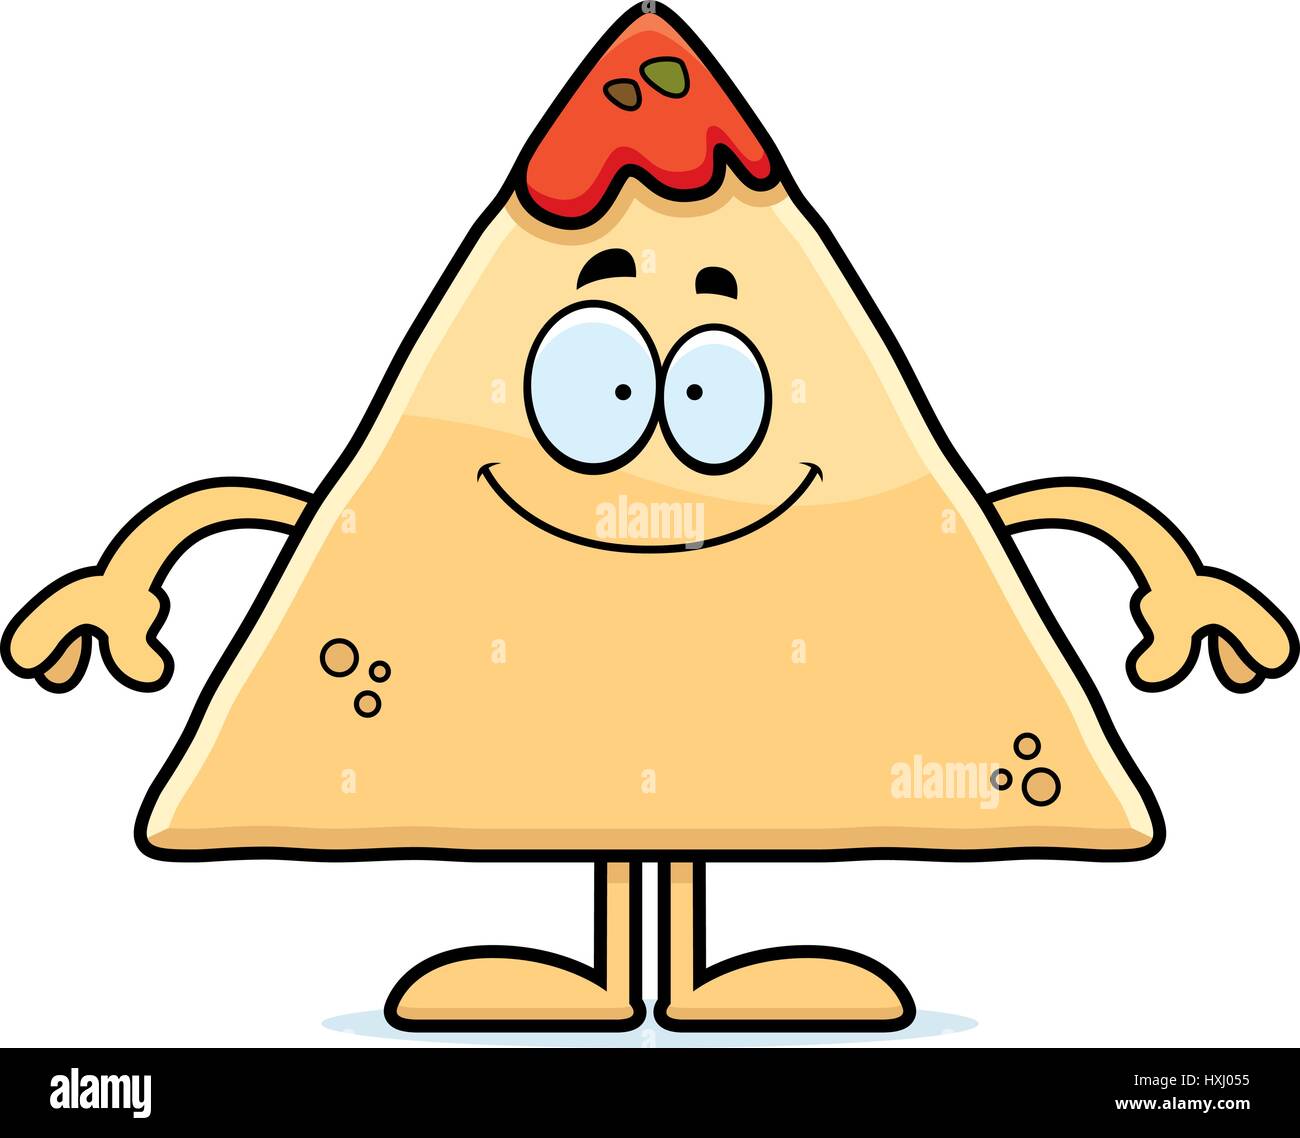 A cartoon illustration of a tortilla chip with salsa looking happy. Stock Vector